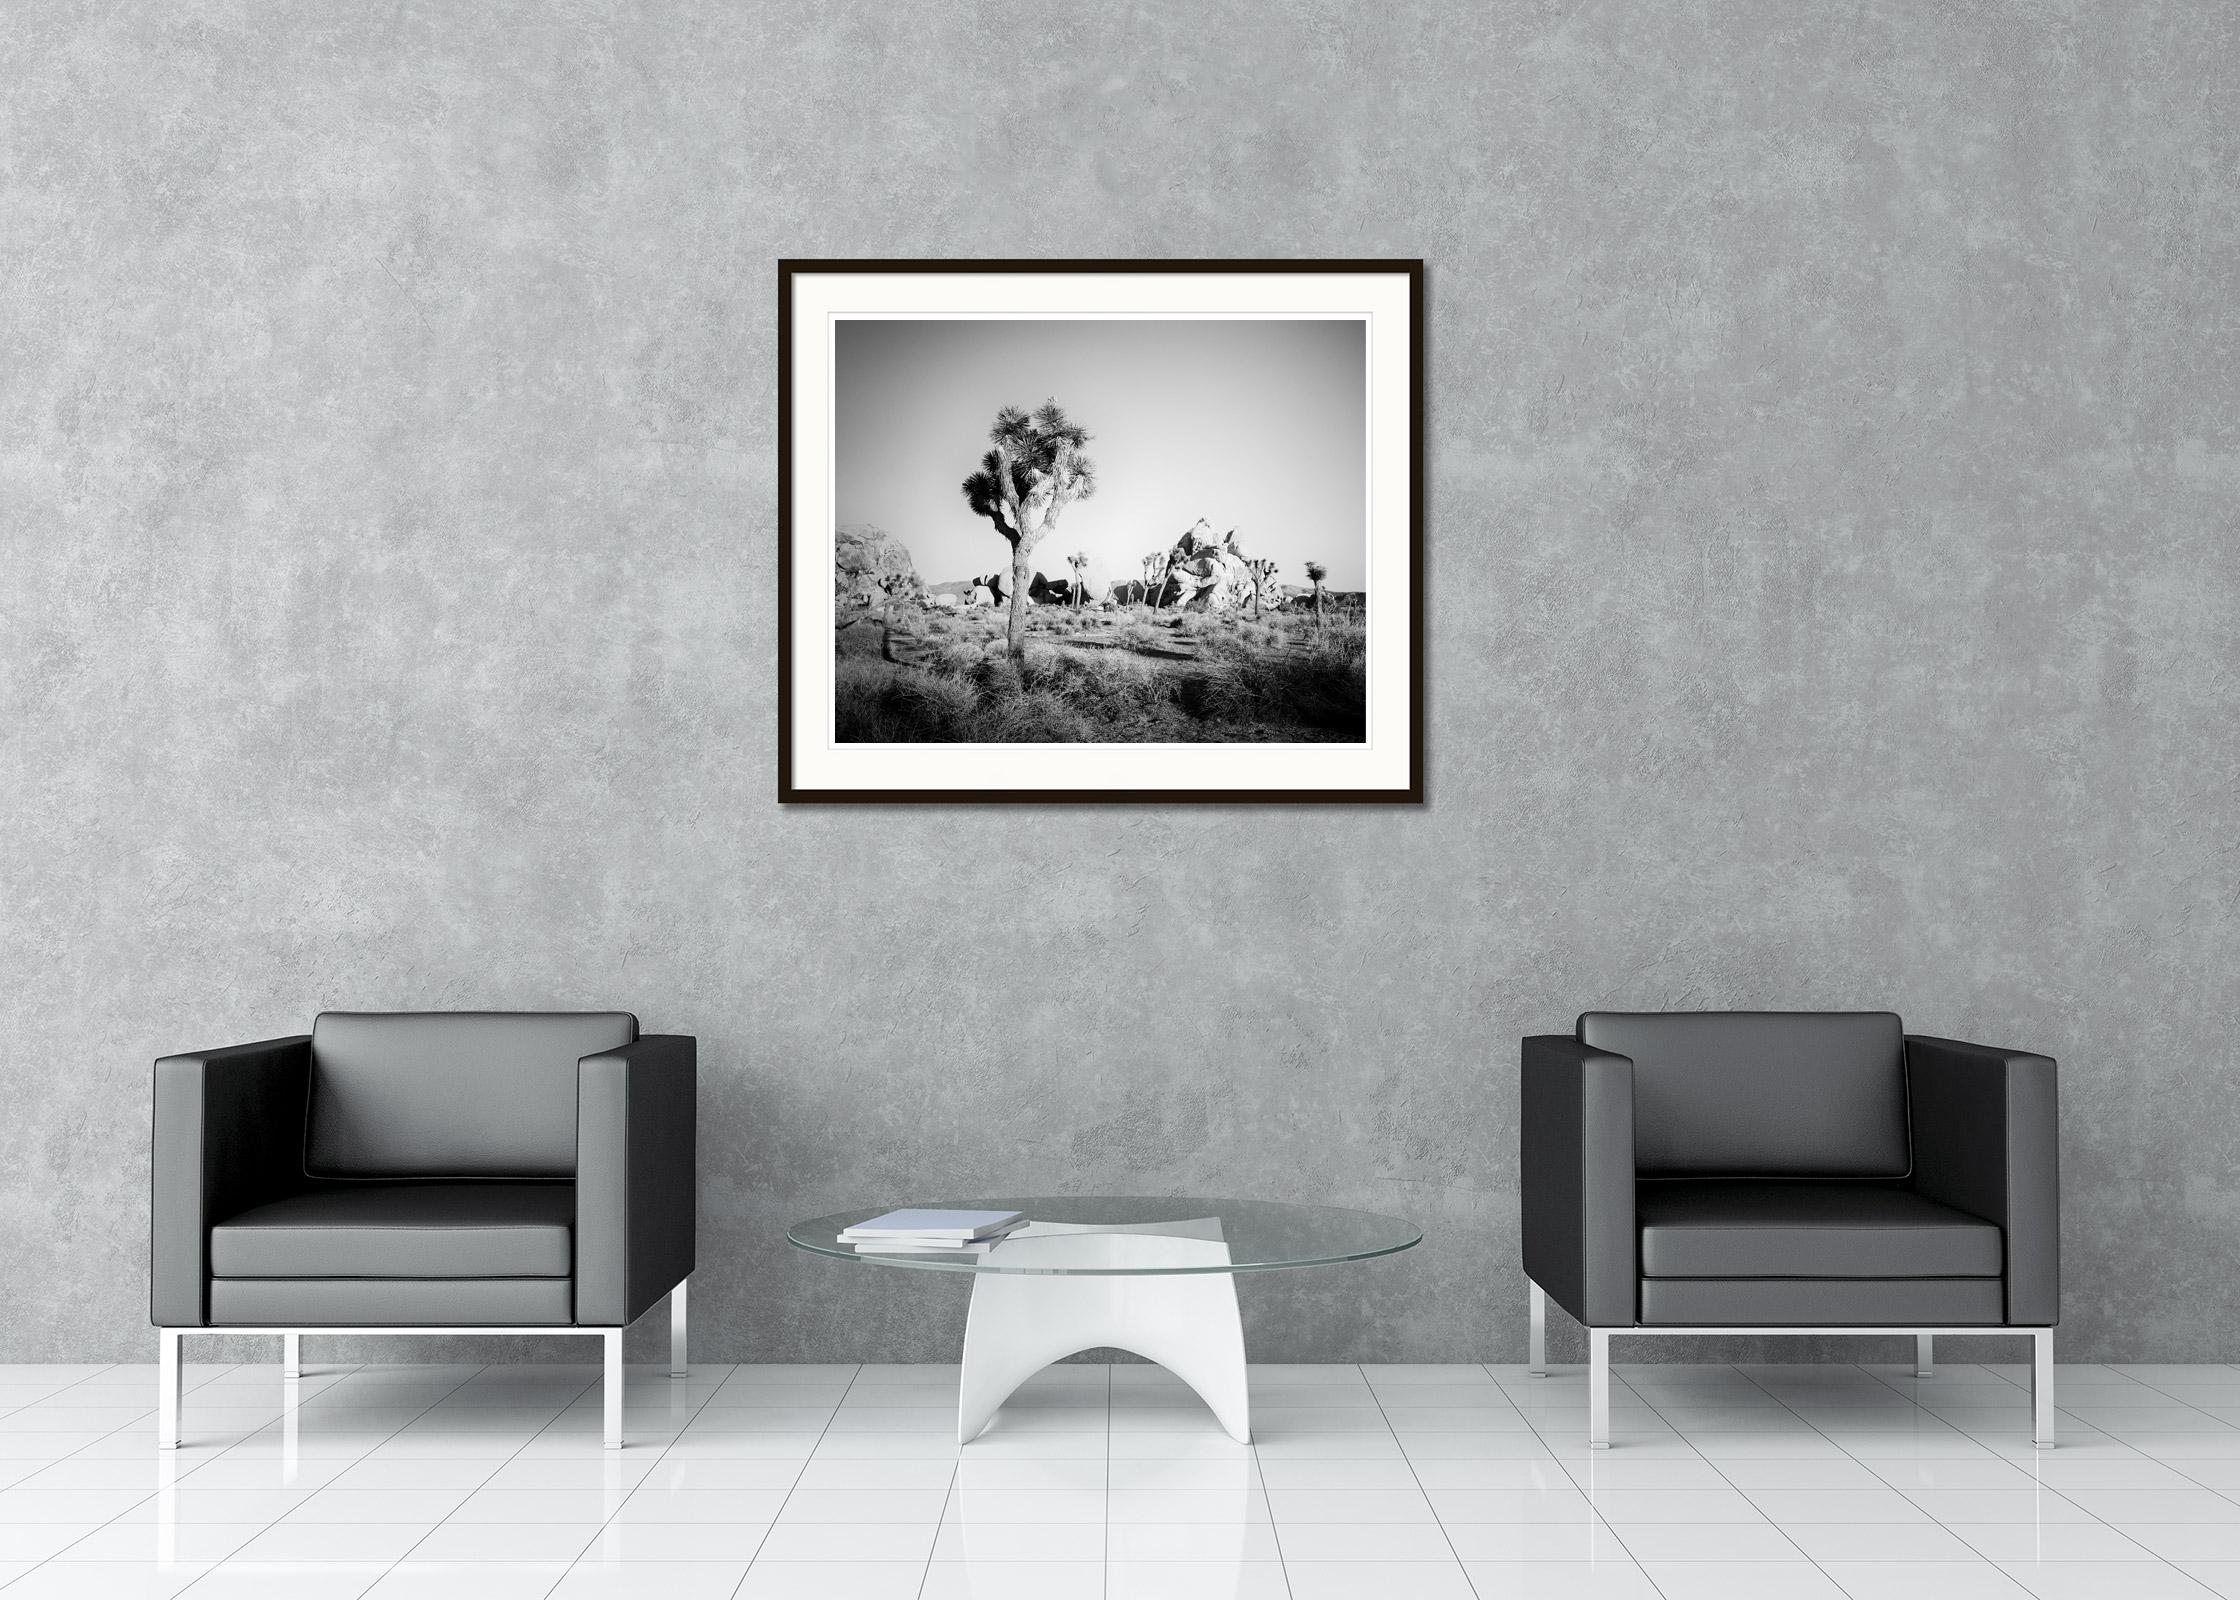 Gerald Berghammer - Limited edition of 9.
Archival fine art pigment print. Signed, titled, dated and numbered by artist. Certificate of authenticity included. Printed with 4cm white border.
15.75 x 19.69 in. (40 x 50 cm) edition of 9
23.63 x 29.53